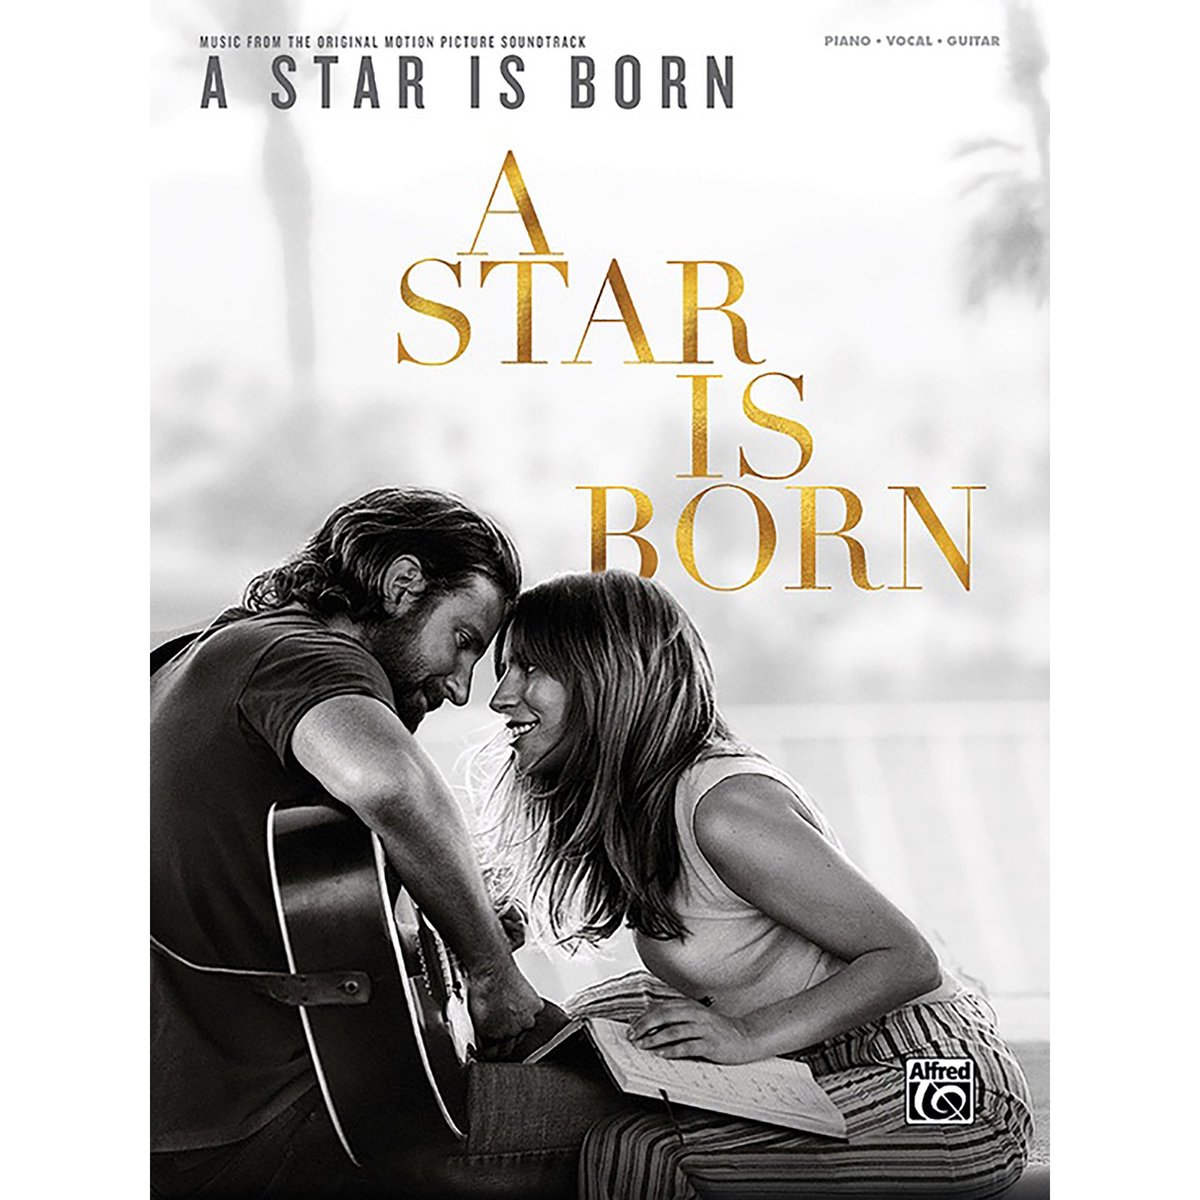 A Star Is Born - Alfred Music